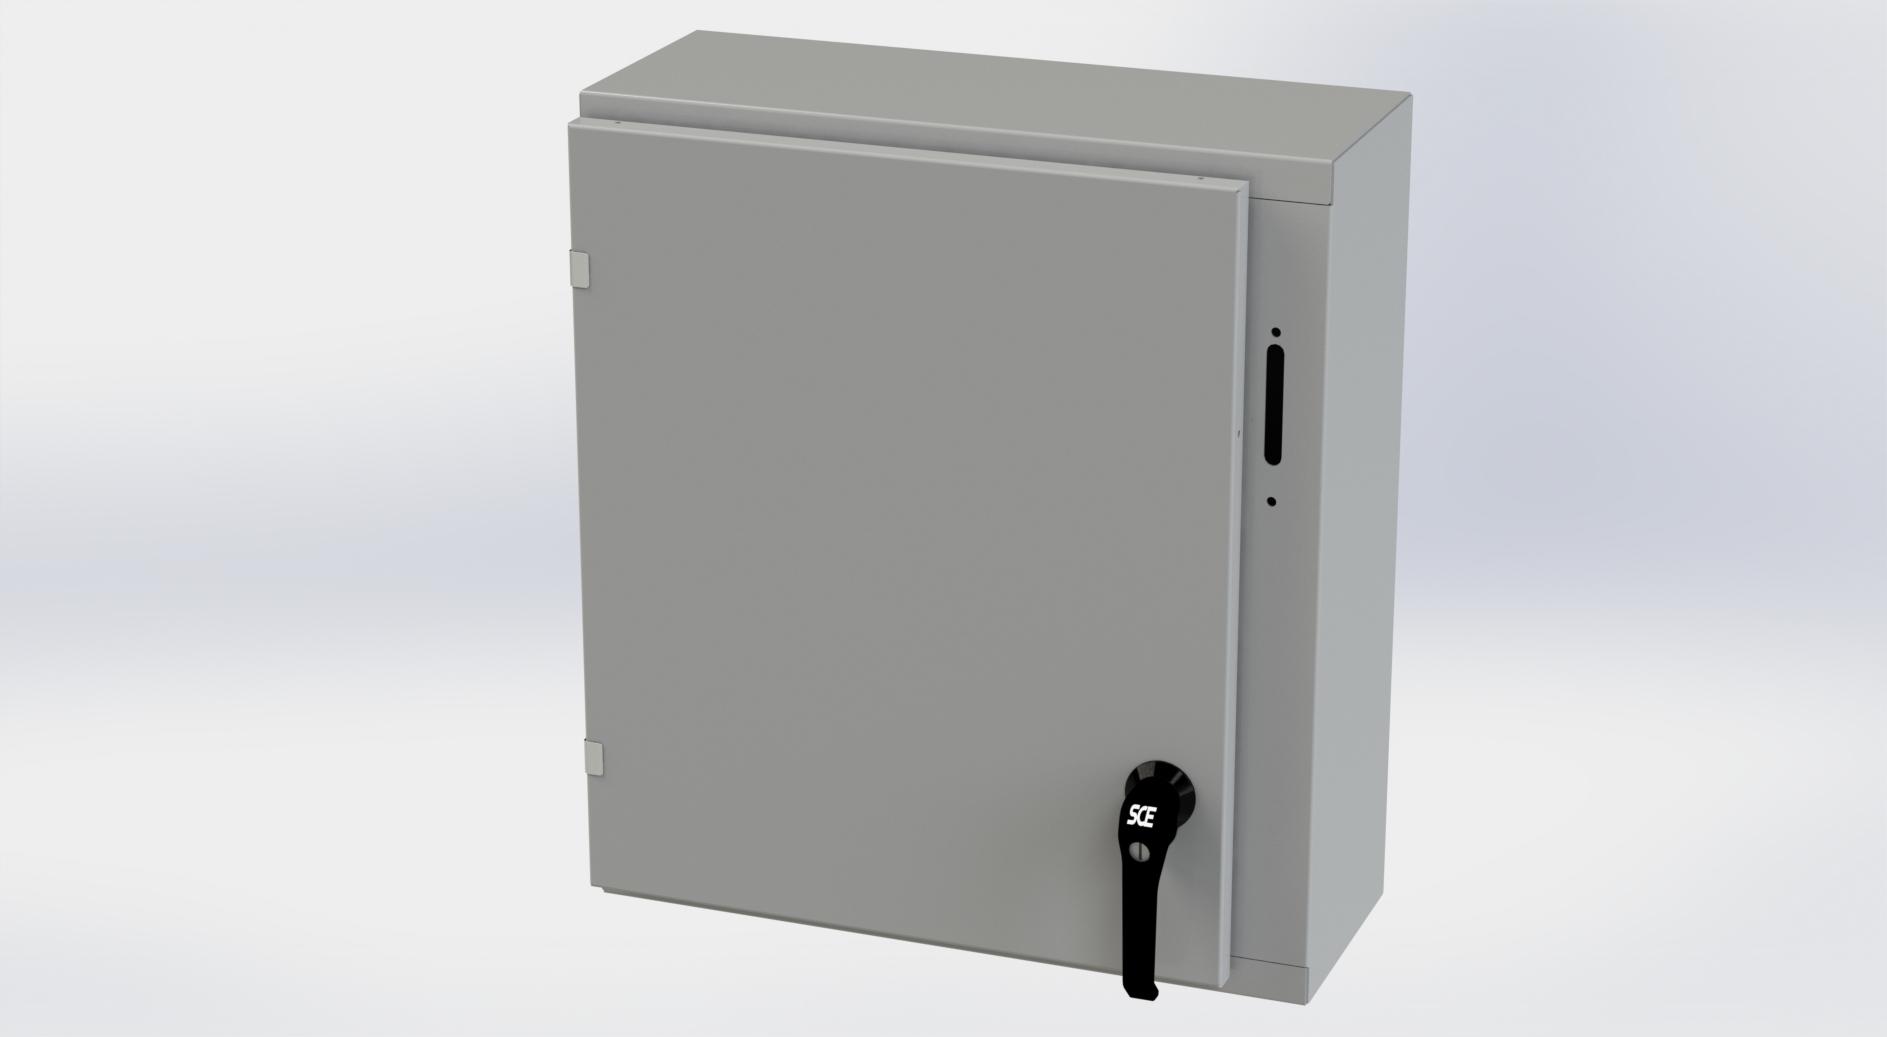 Saginaw Control SCE-24XEL2108LP XEL LP Enclosure, Height:24.00", Width:21.38", Depth:8.00", ANSI-61 gray powder coating inside and out. Optional sub-panels are powder coated white.